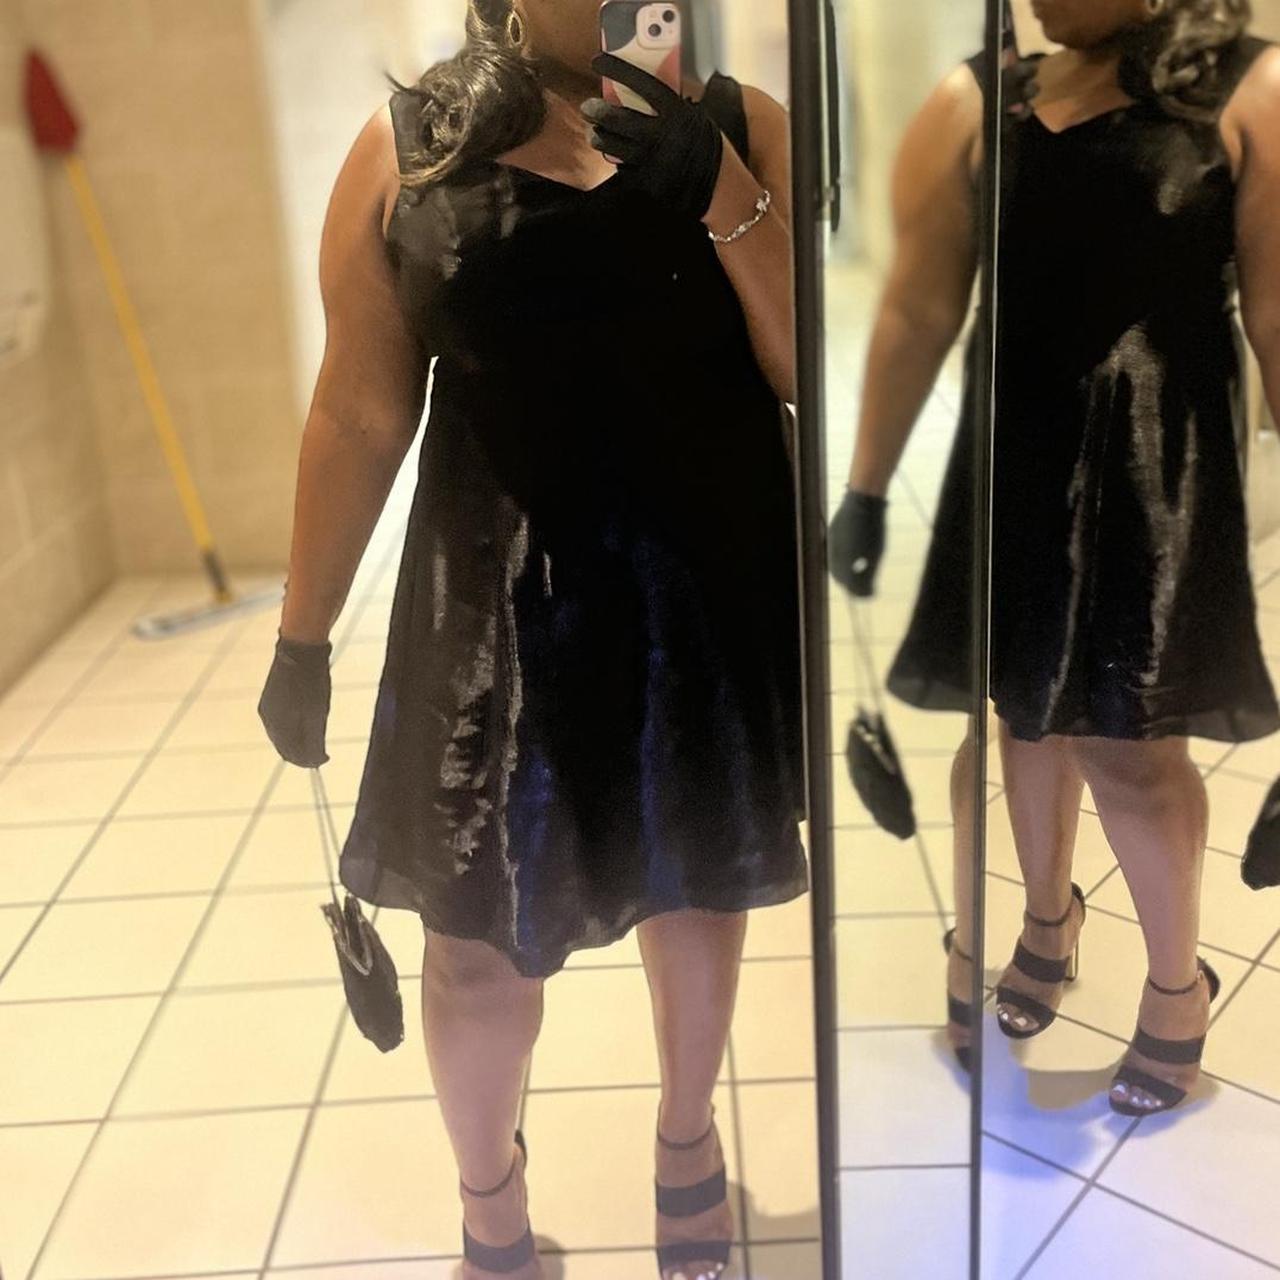 All Black Women's Black and Silver Dress (2)